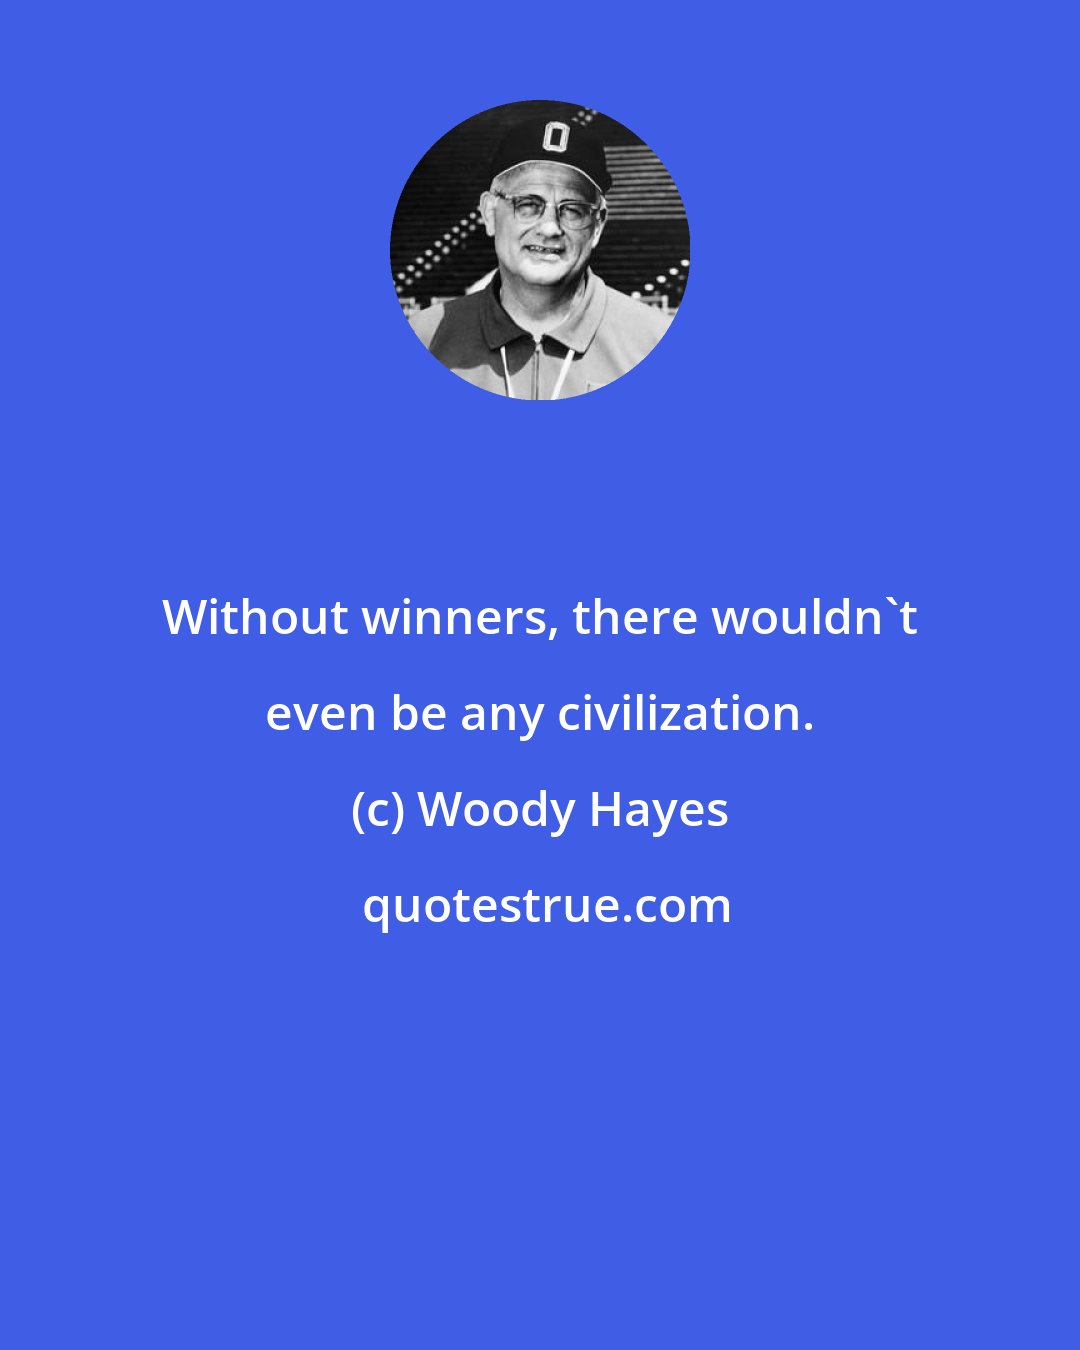 Woody Hayes: Without winners, there wouldn't even be any civilization.